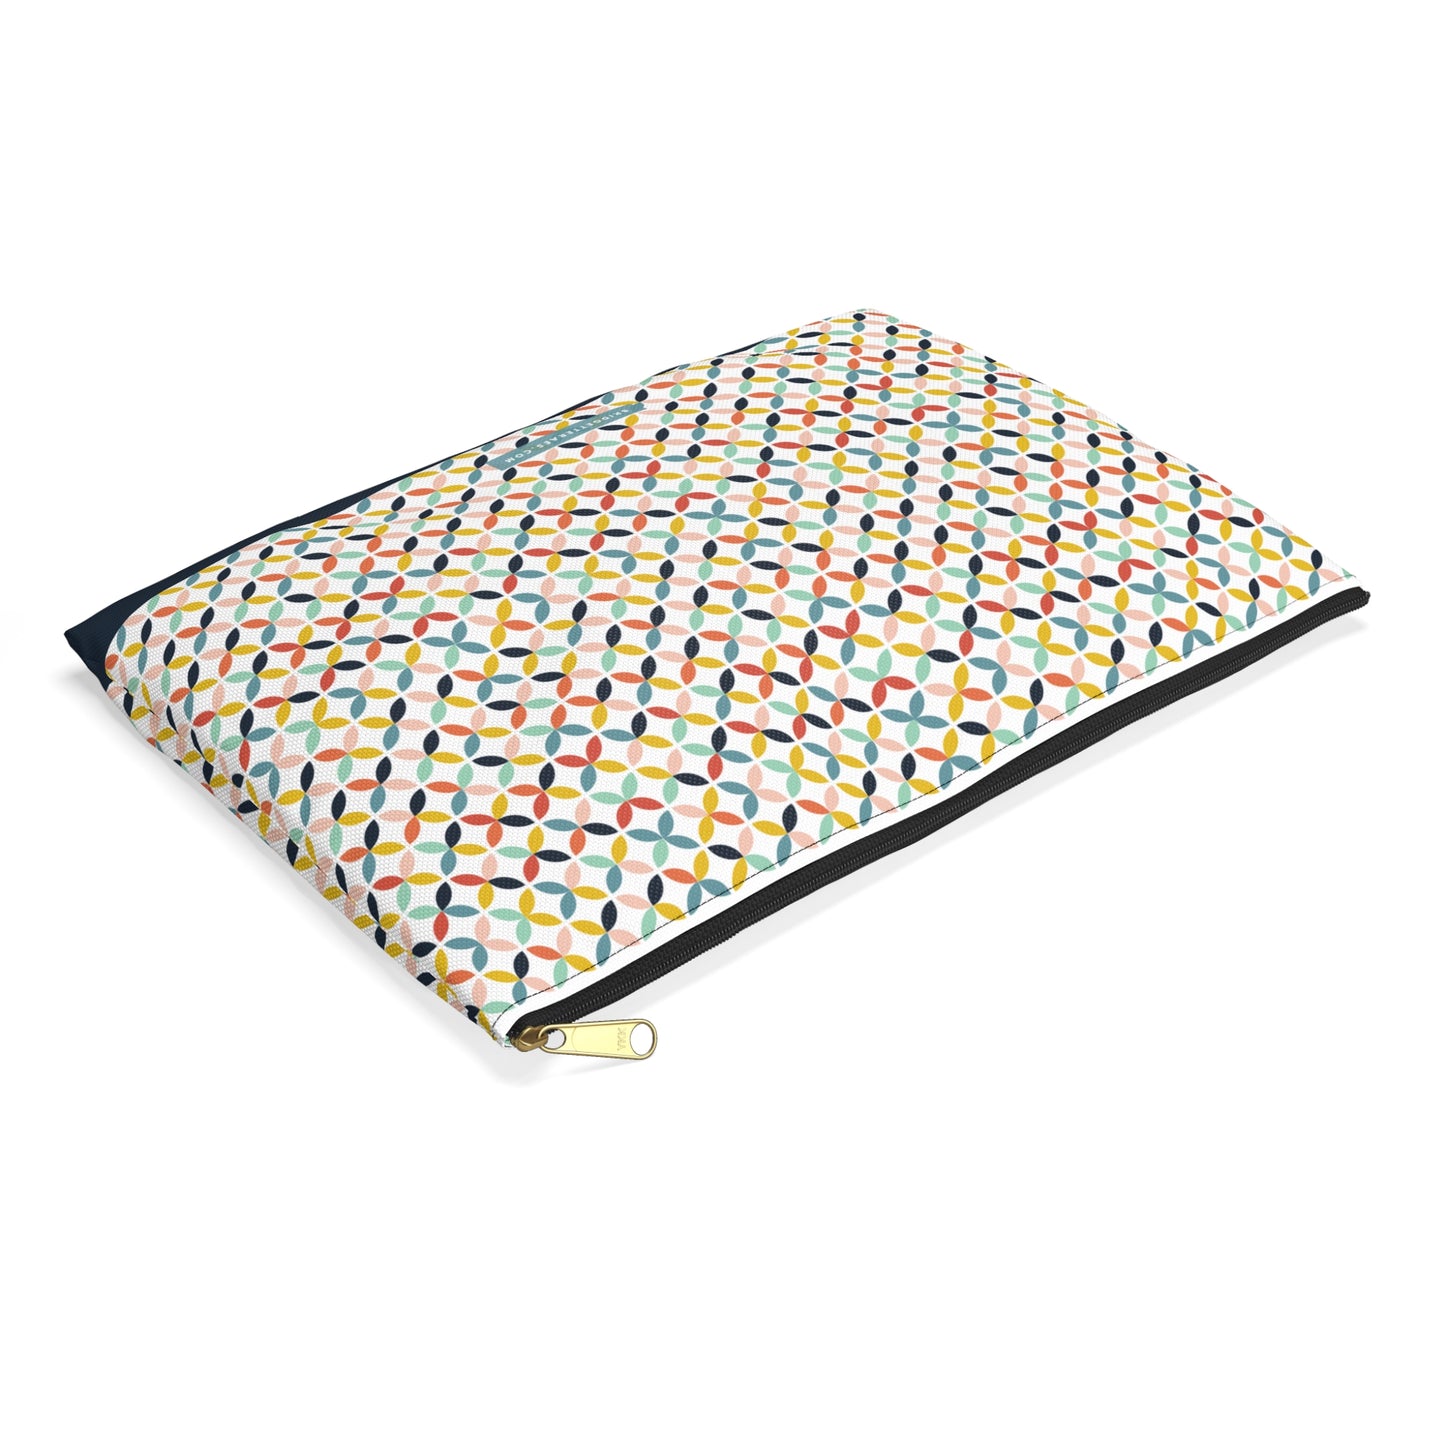 Primary Tiles Accessory Pouch